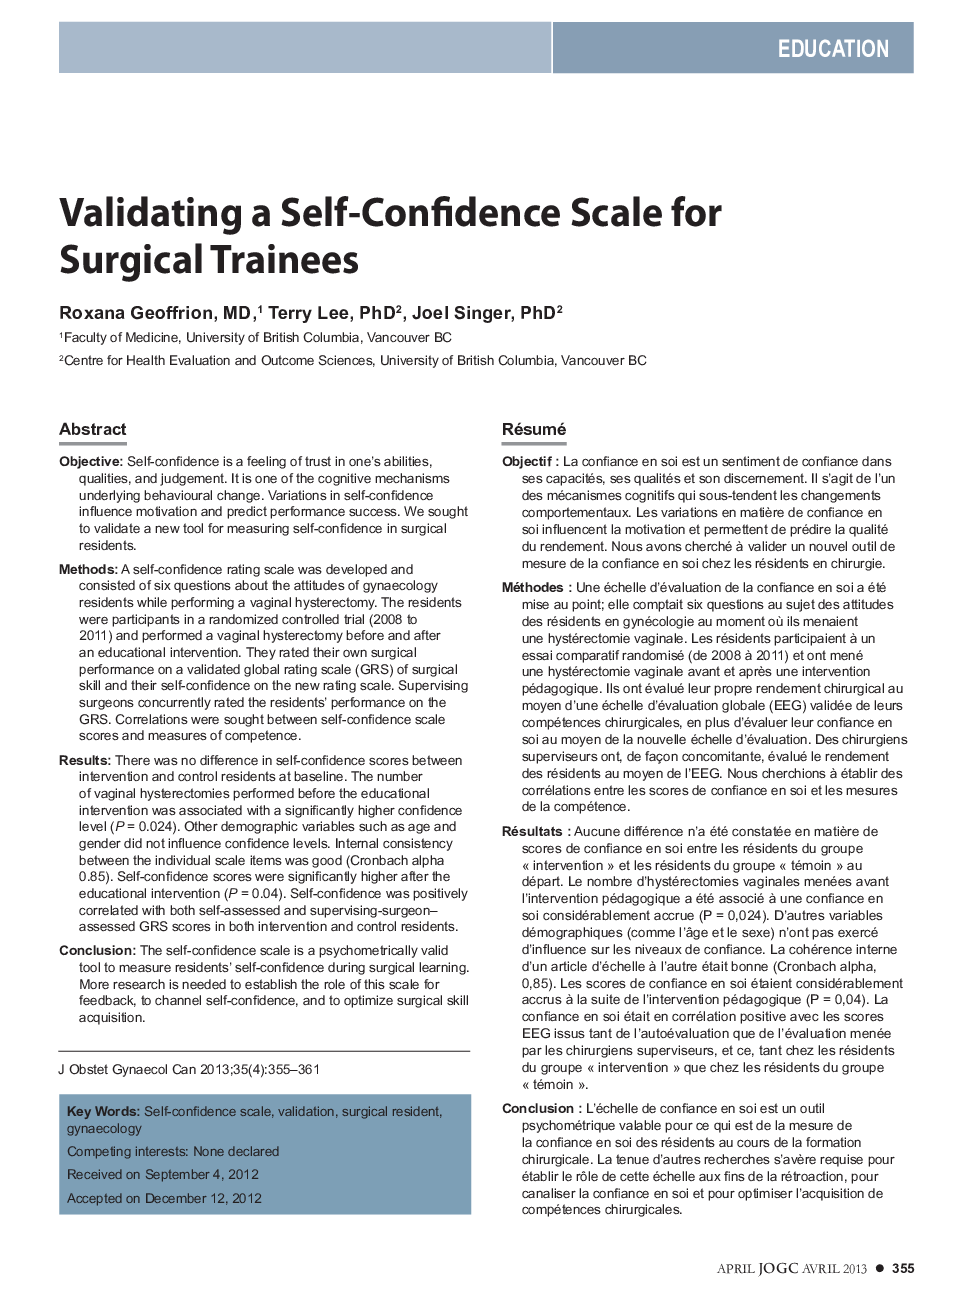 Validating a Self-Confidence Scale for Surgical Trainees